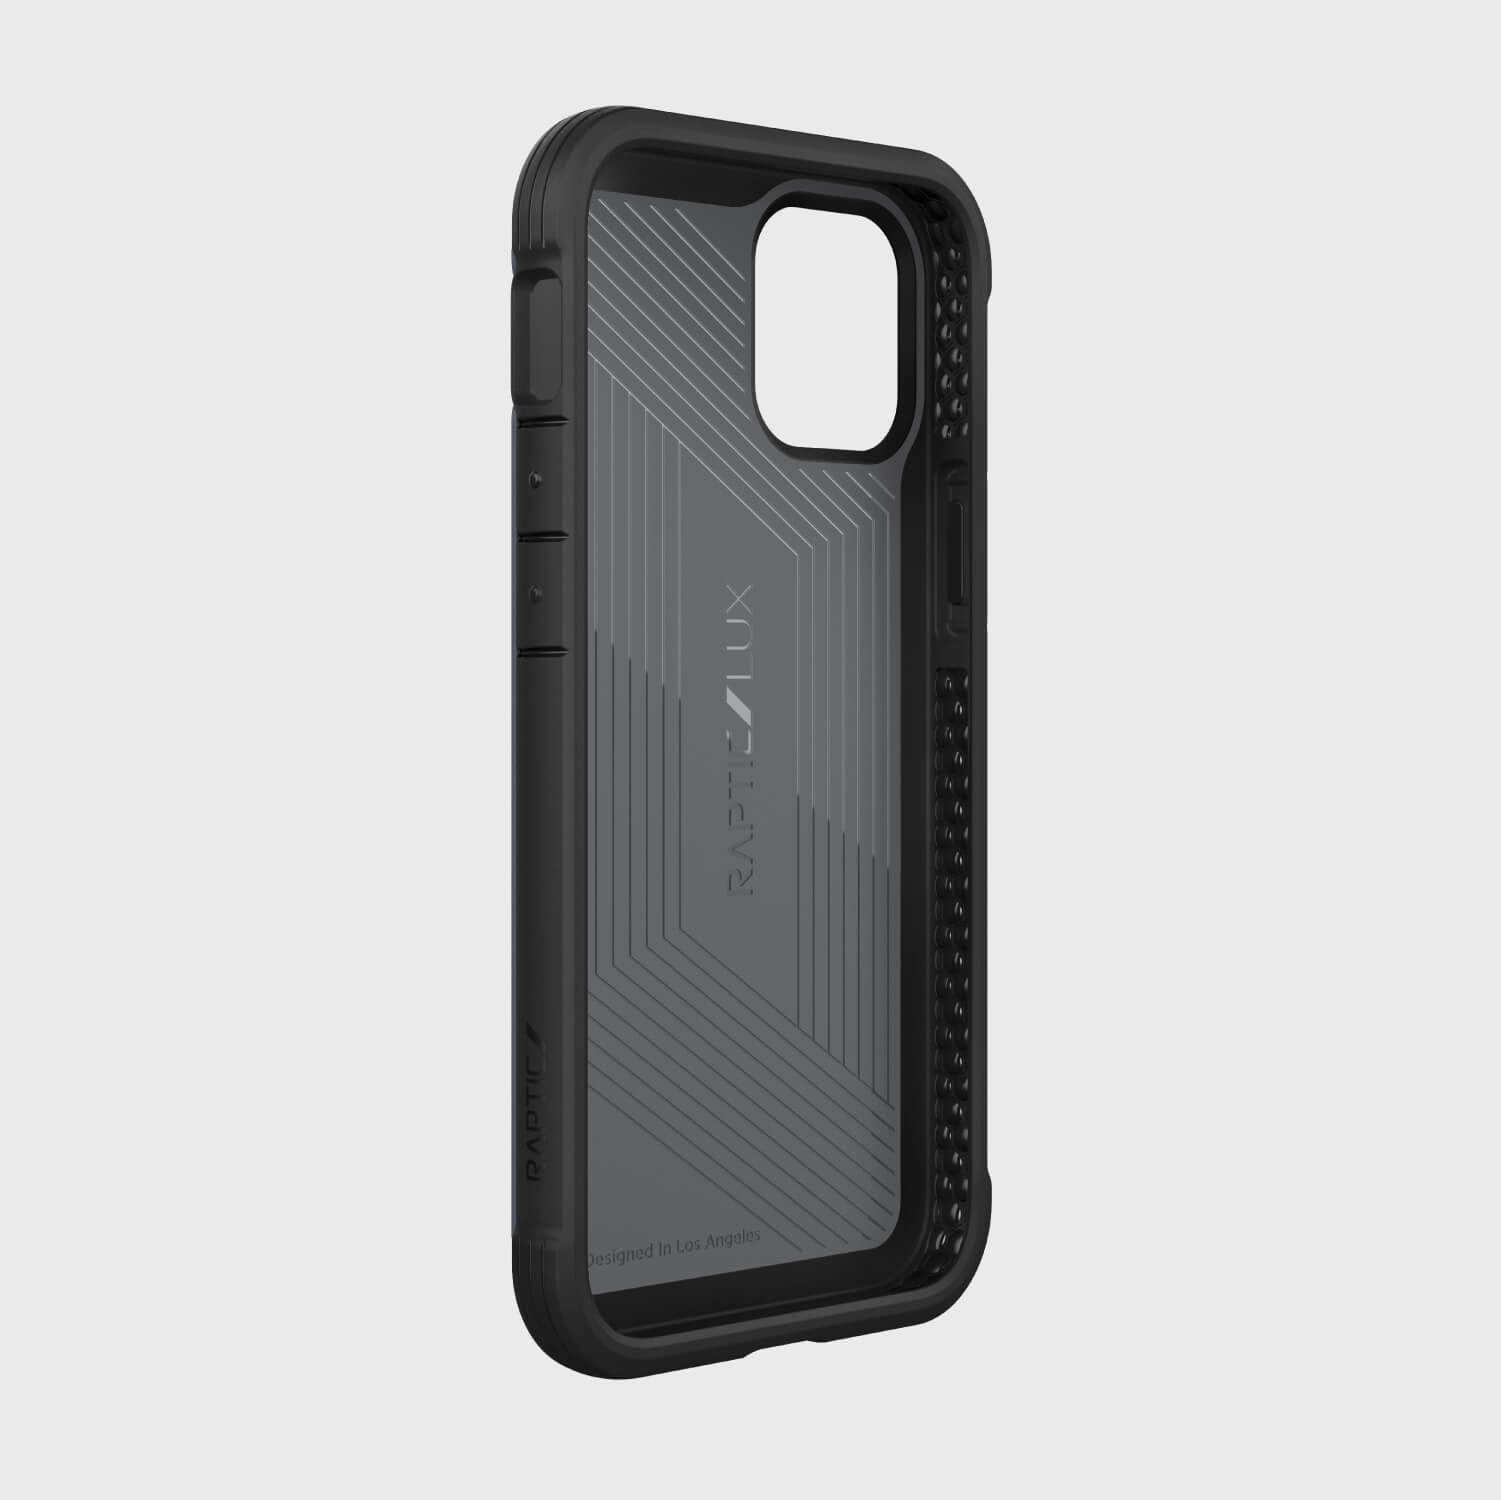 The luxury Raptic Lux case for iPhone 12 Mini is shown on a white background.